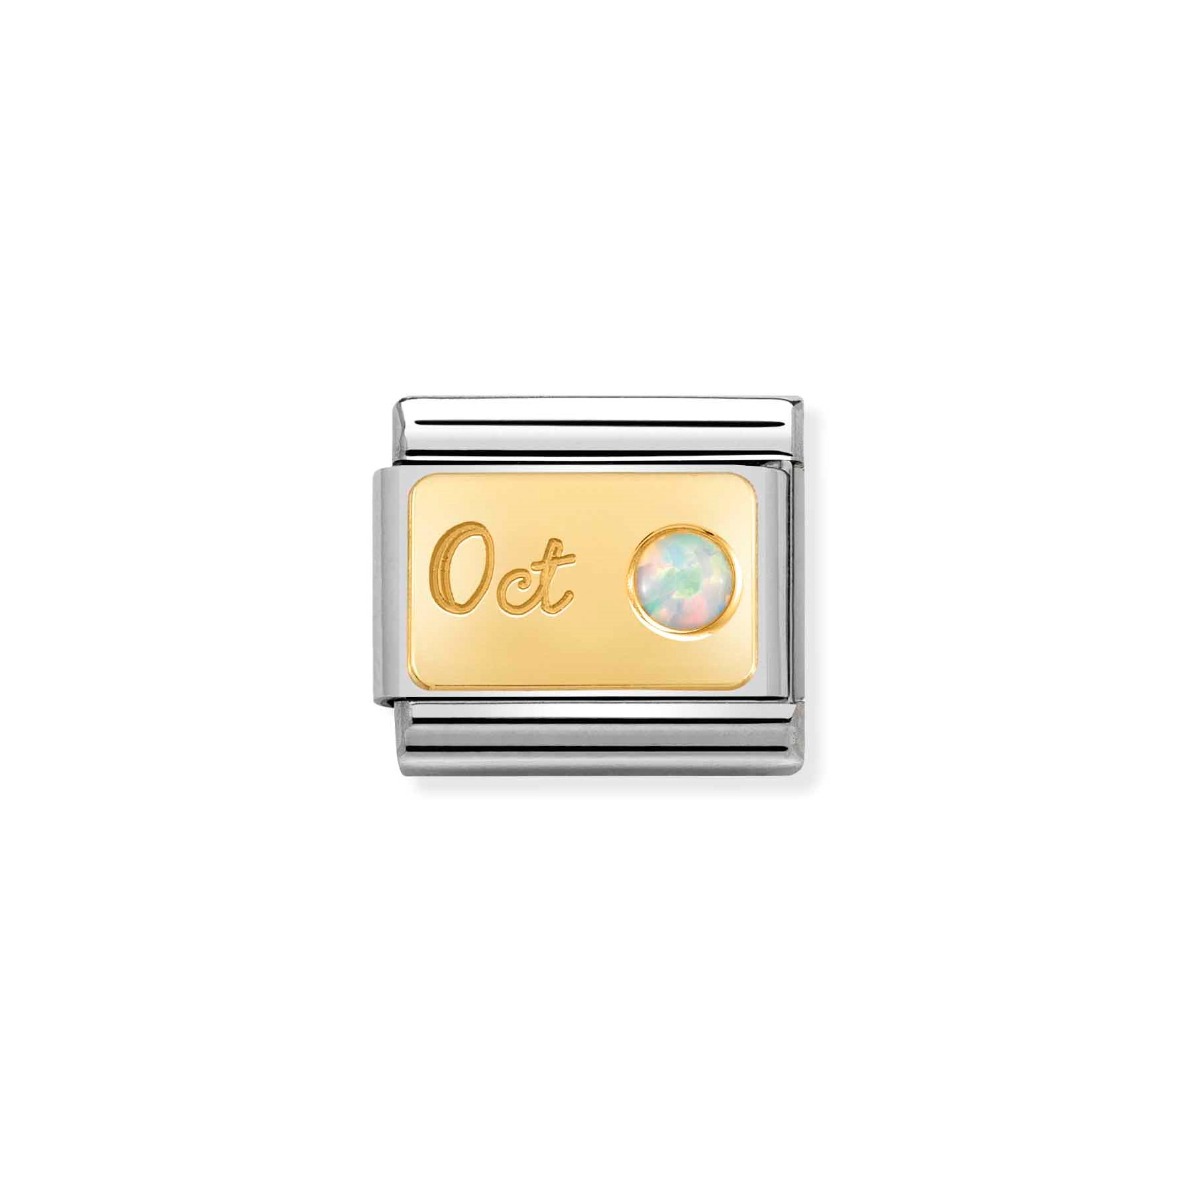 Nomination  Classic Birthstone Charm - Gold October White Opal 030519_10